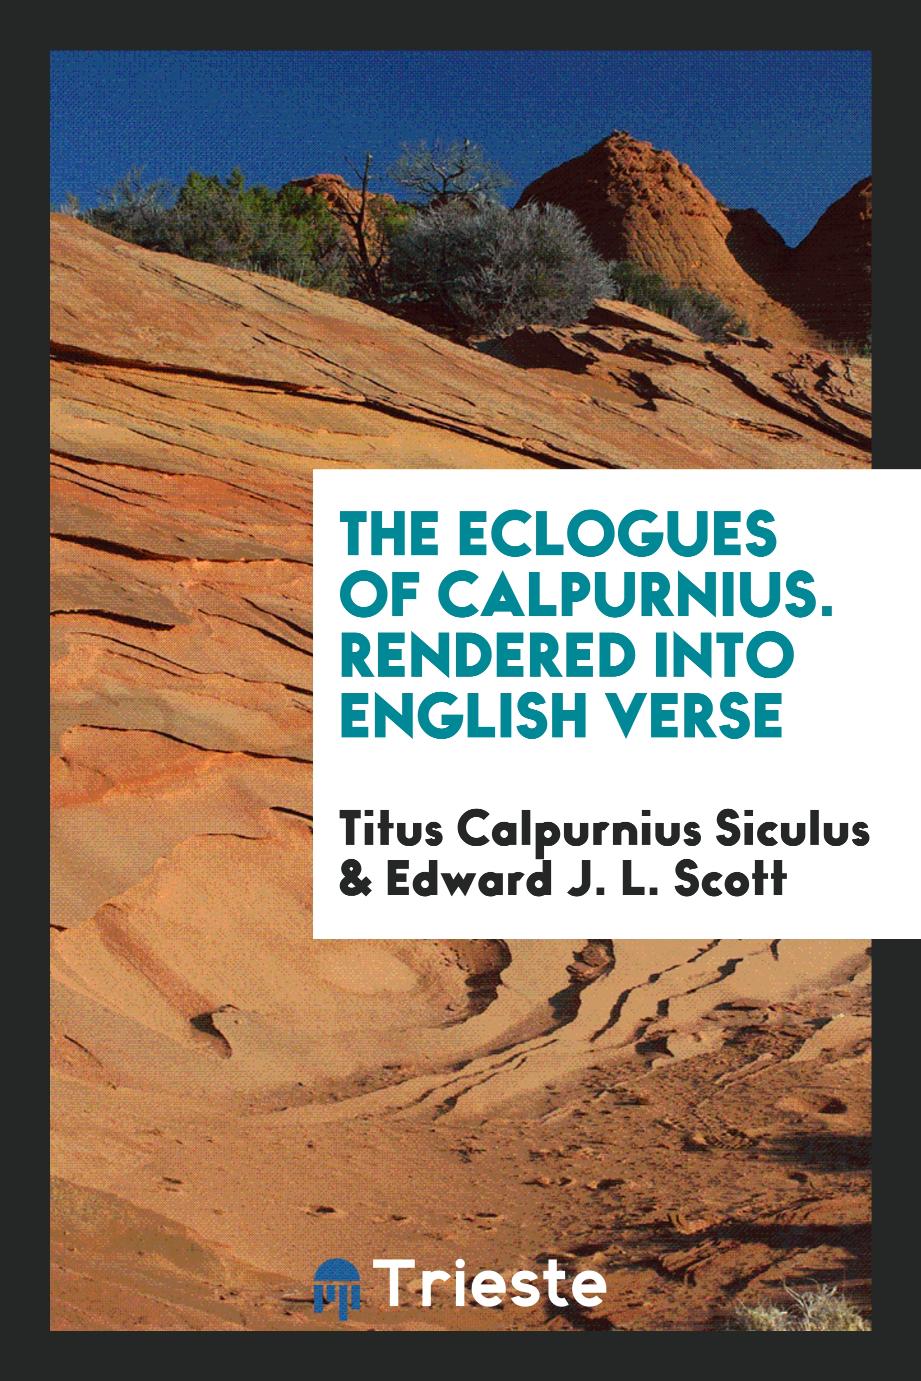 The Eclogues of Calpurnius. Rendered into English verse